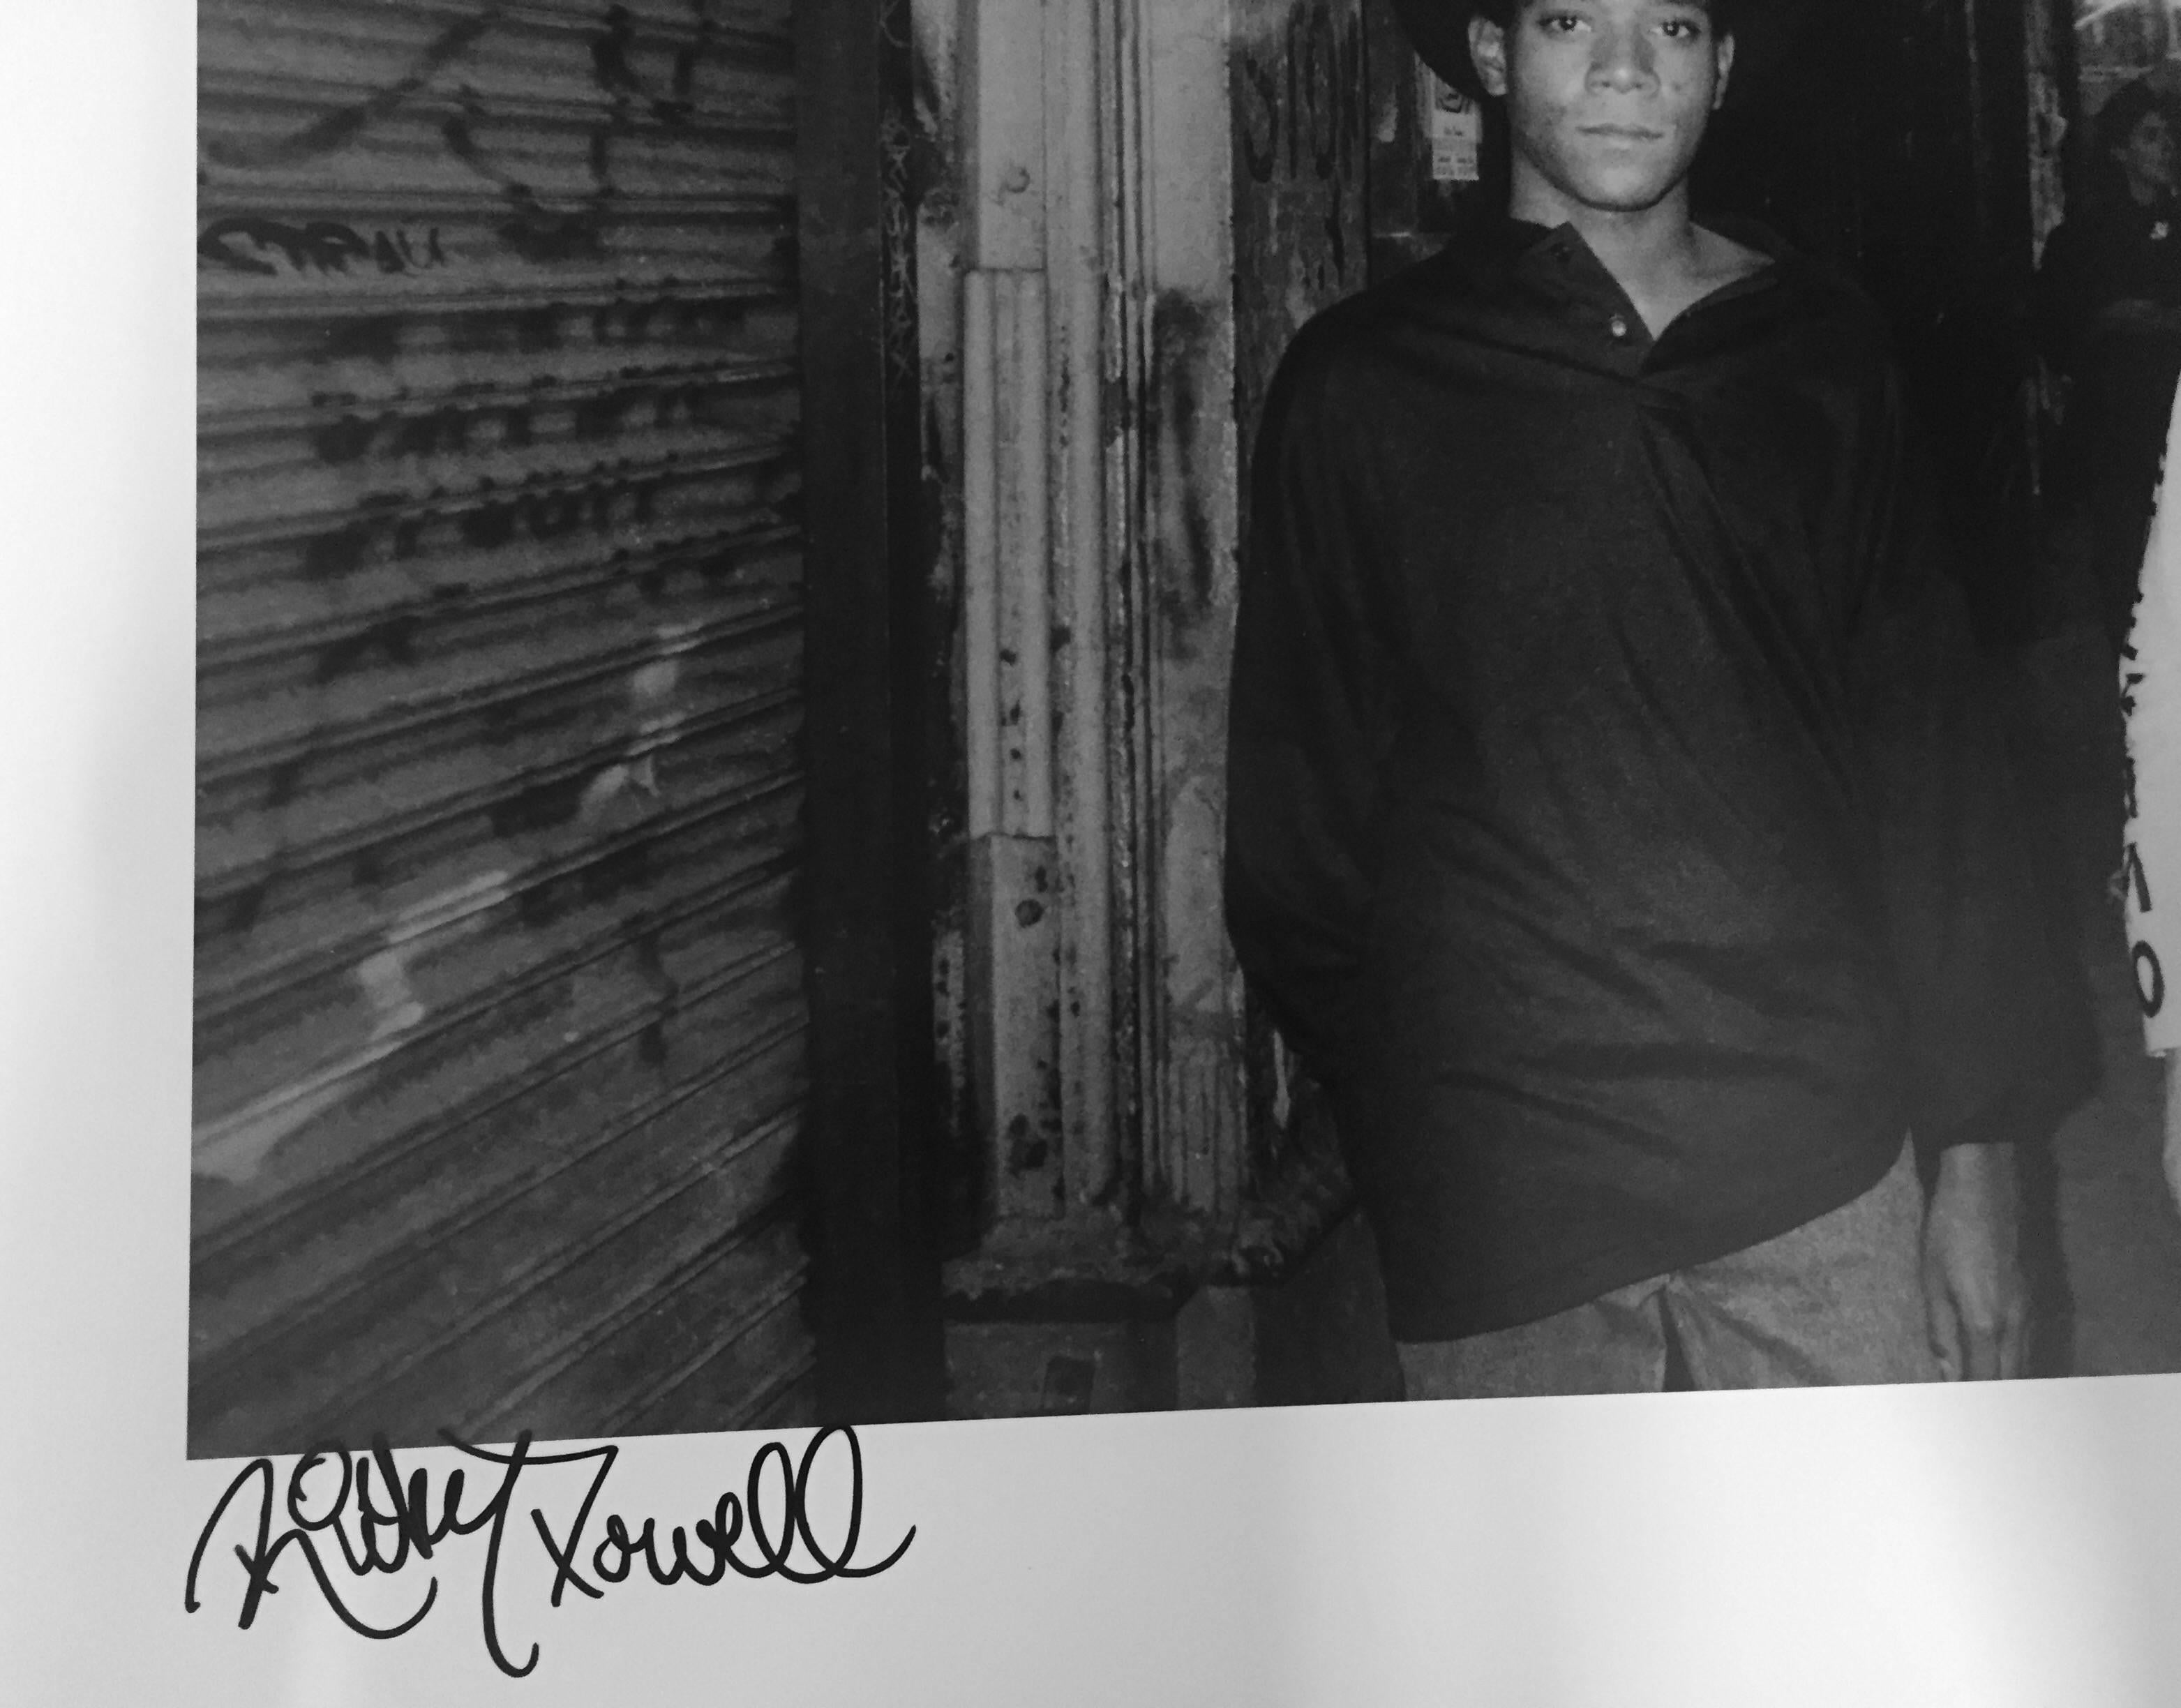 Ricky Powell took this photograph of Warhol and Basquiat on Mercer Street, in 1985, as the two were on their way to the opening of an exhibition of their Collaboration paintings at Tony Shafrazi Gallery.   

Ricky Powell was born and raised in New